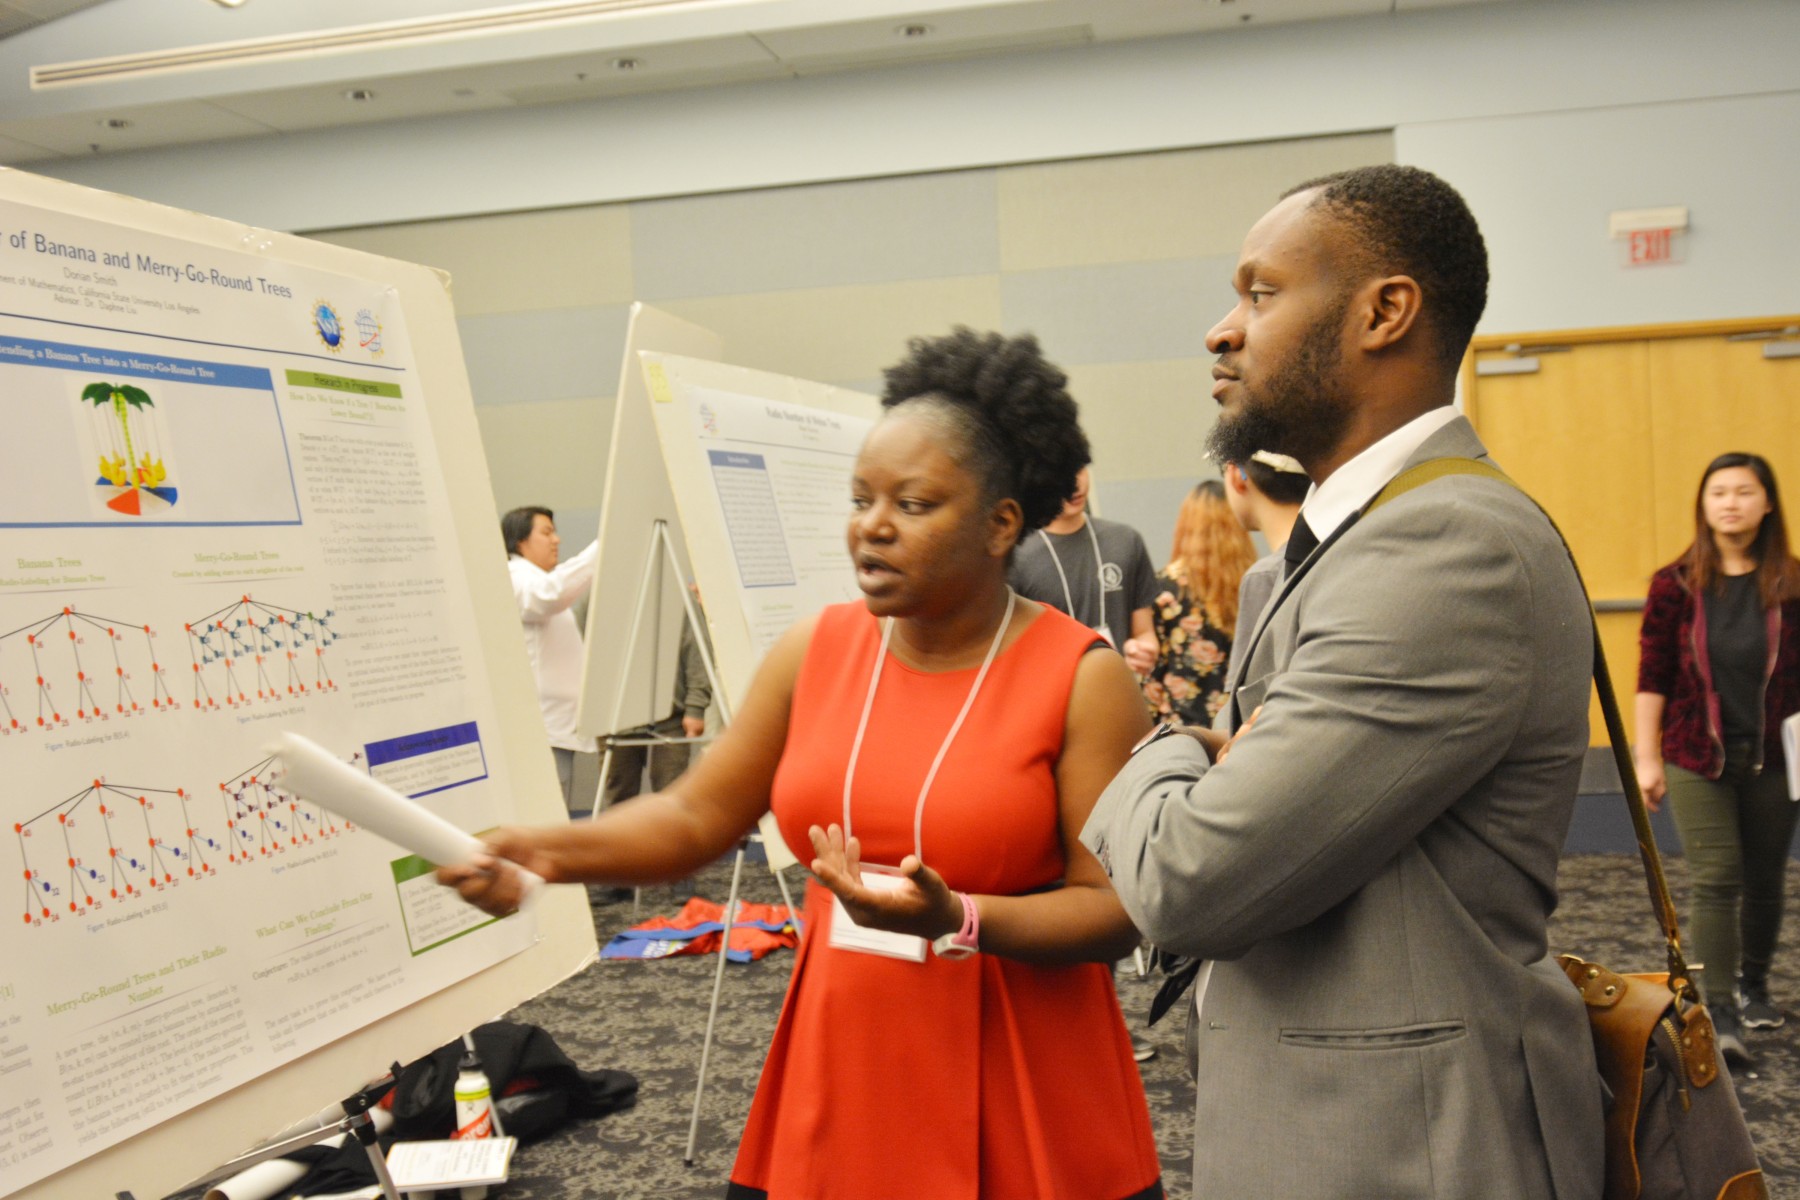 student discussing her poster presentation with attendee